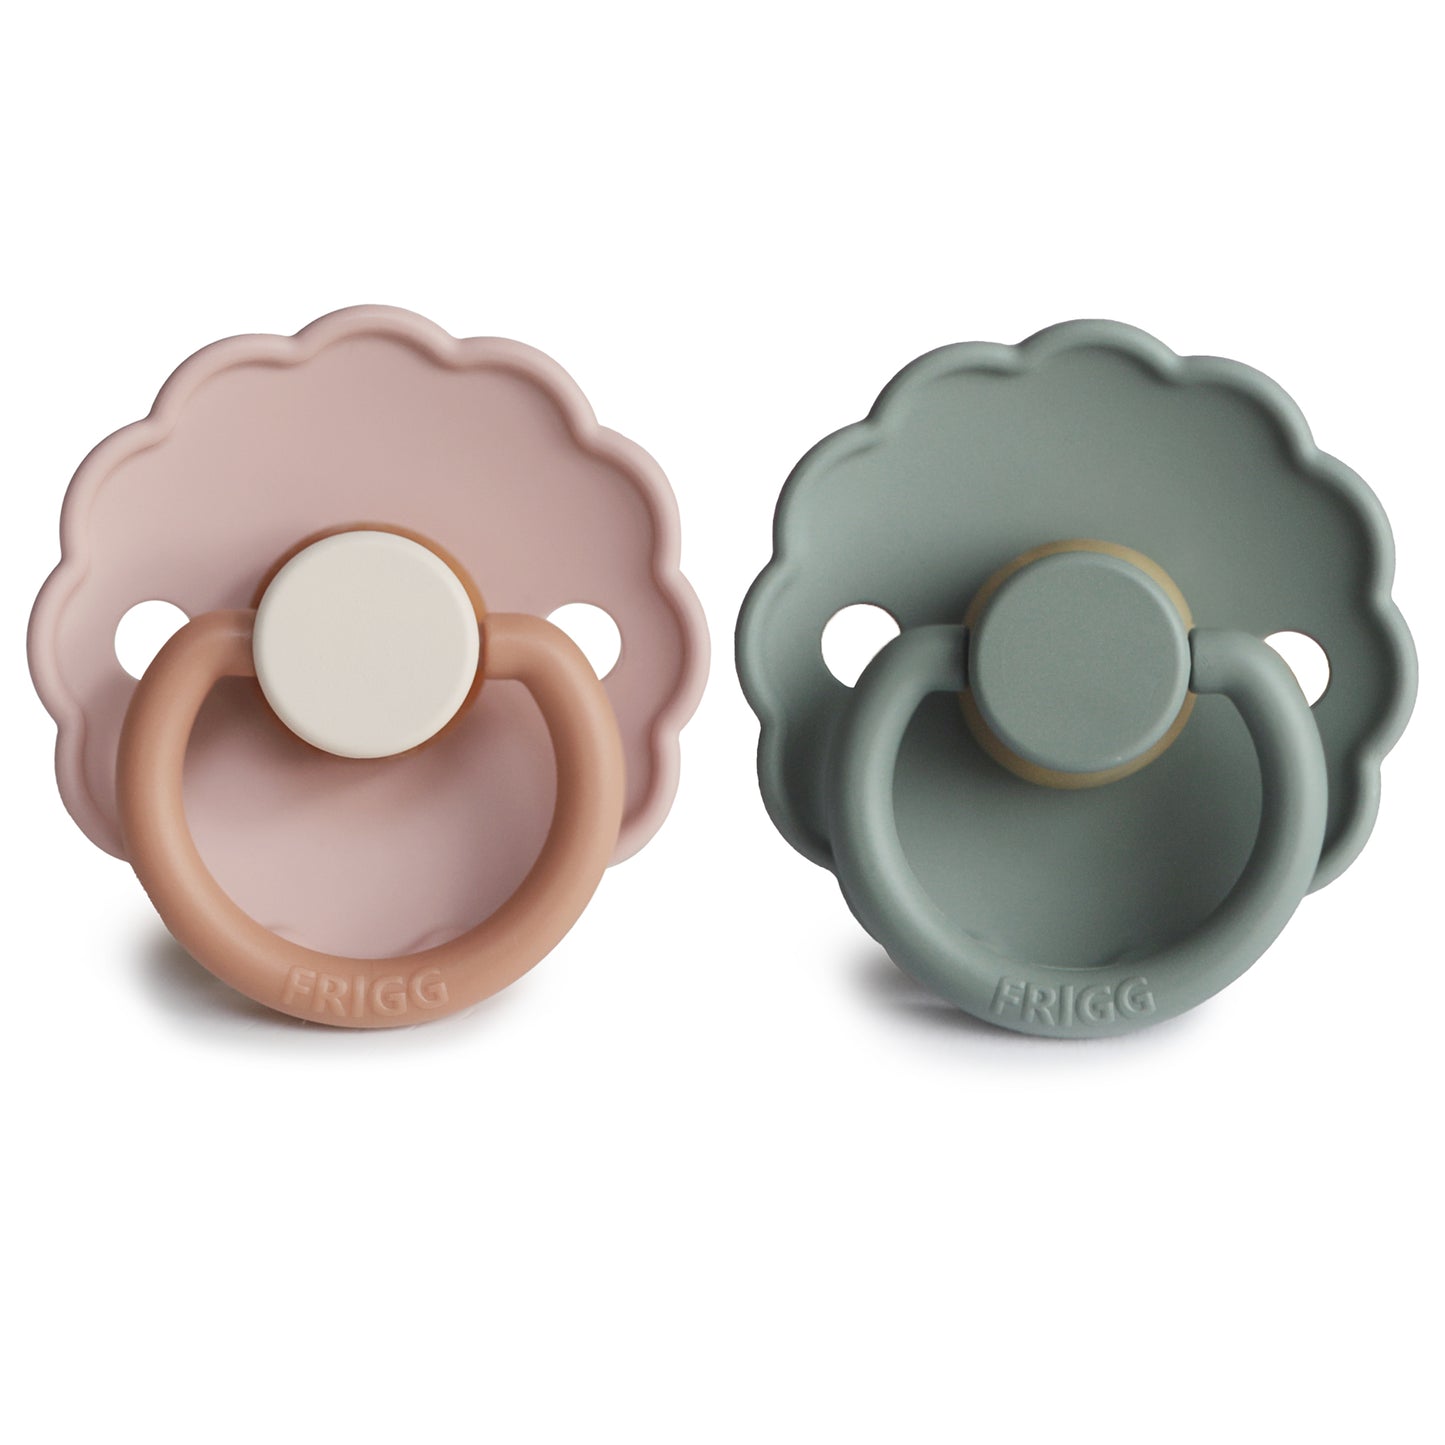 FRIGG DAISY NATURAL RUBBER BABY PACIFIER (BISCUIT/LILY PAD) 2-PACK